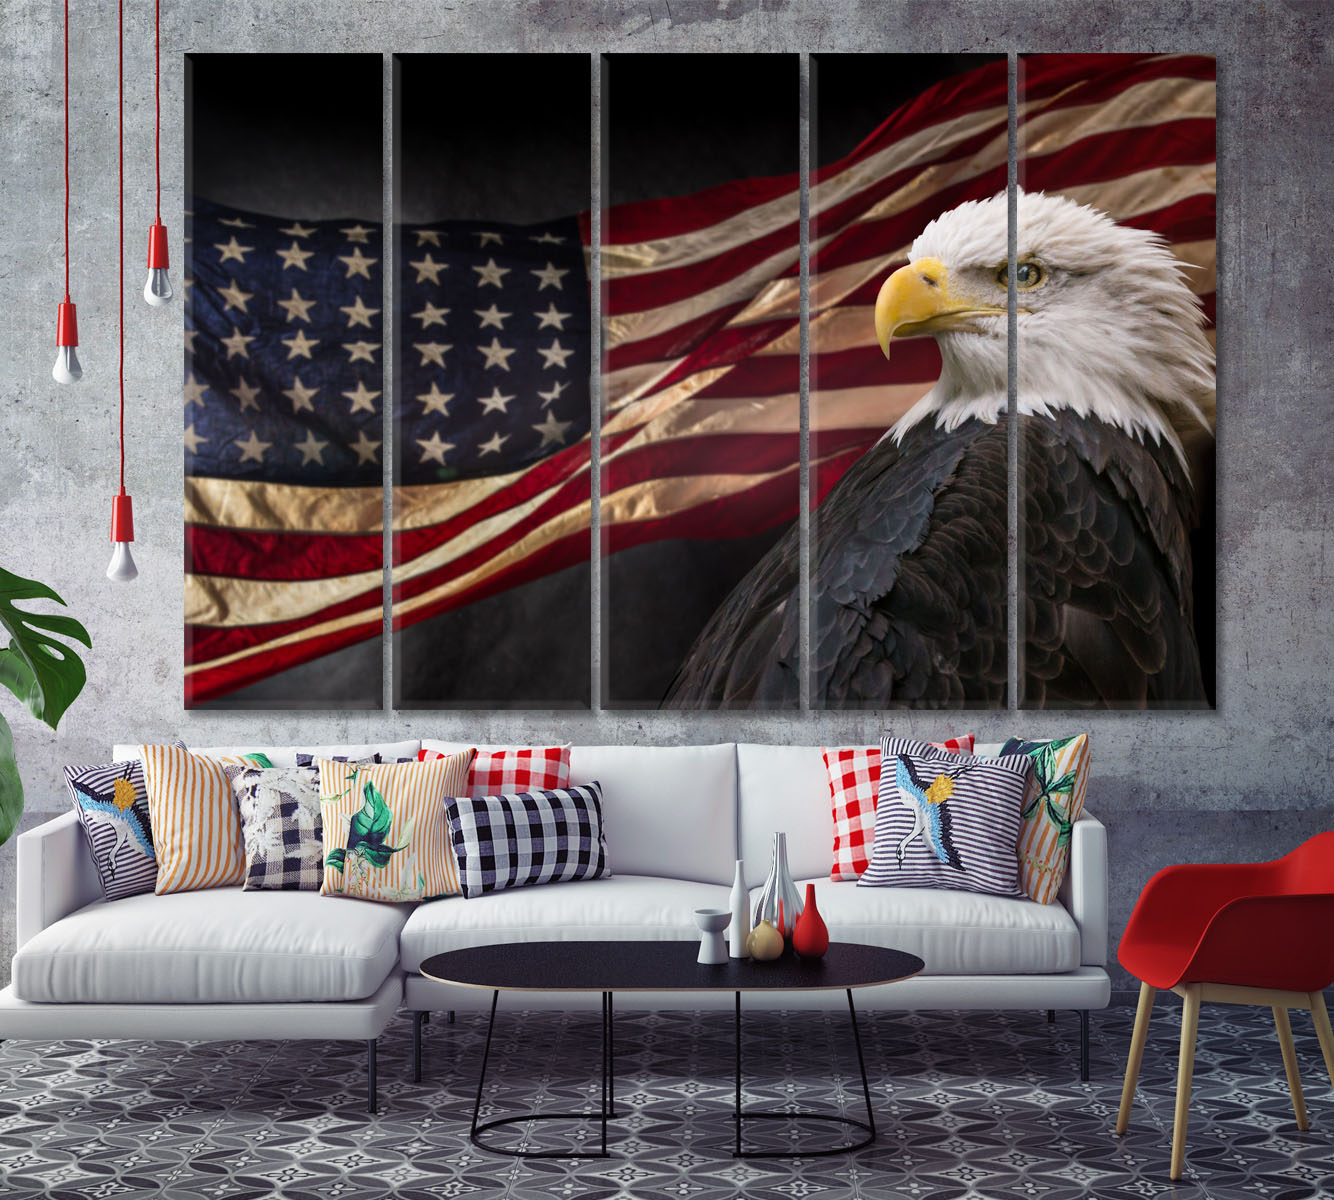 Powerful America Patriotic Symbols Bald Eagle Poster Posters, Flags Giclee Print Artesty 5 panels 36" x 24" 